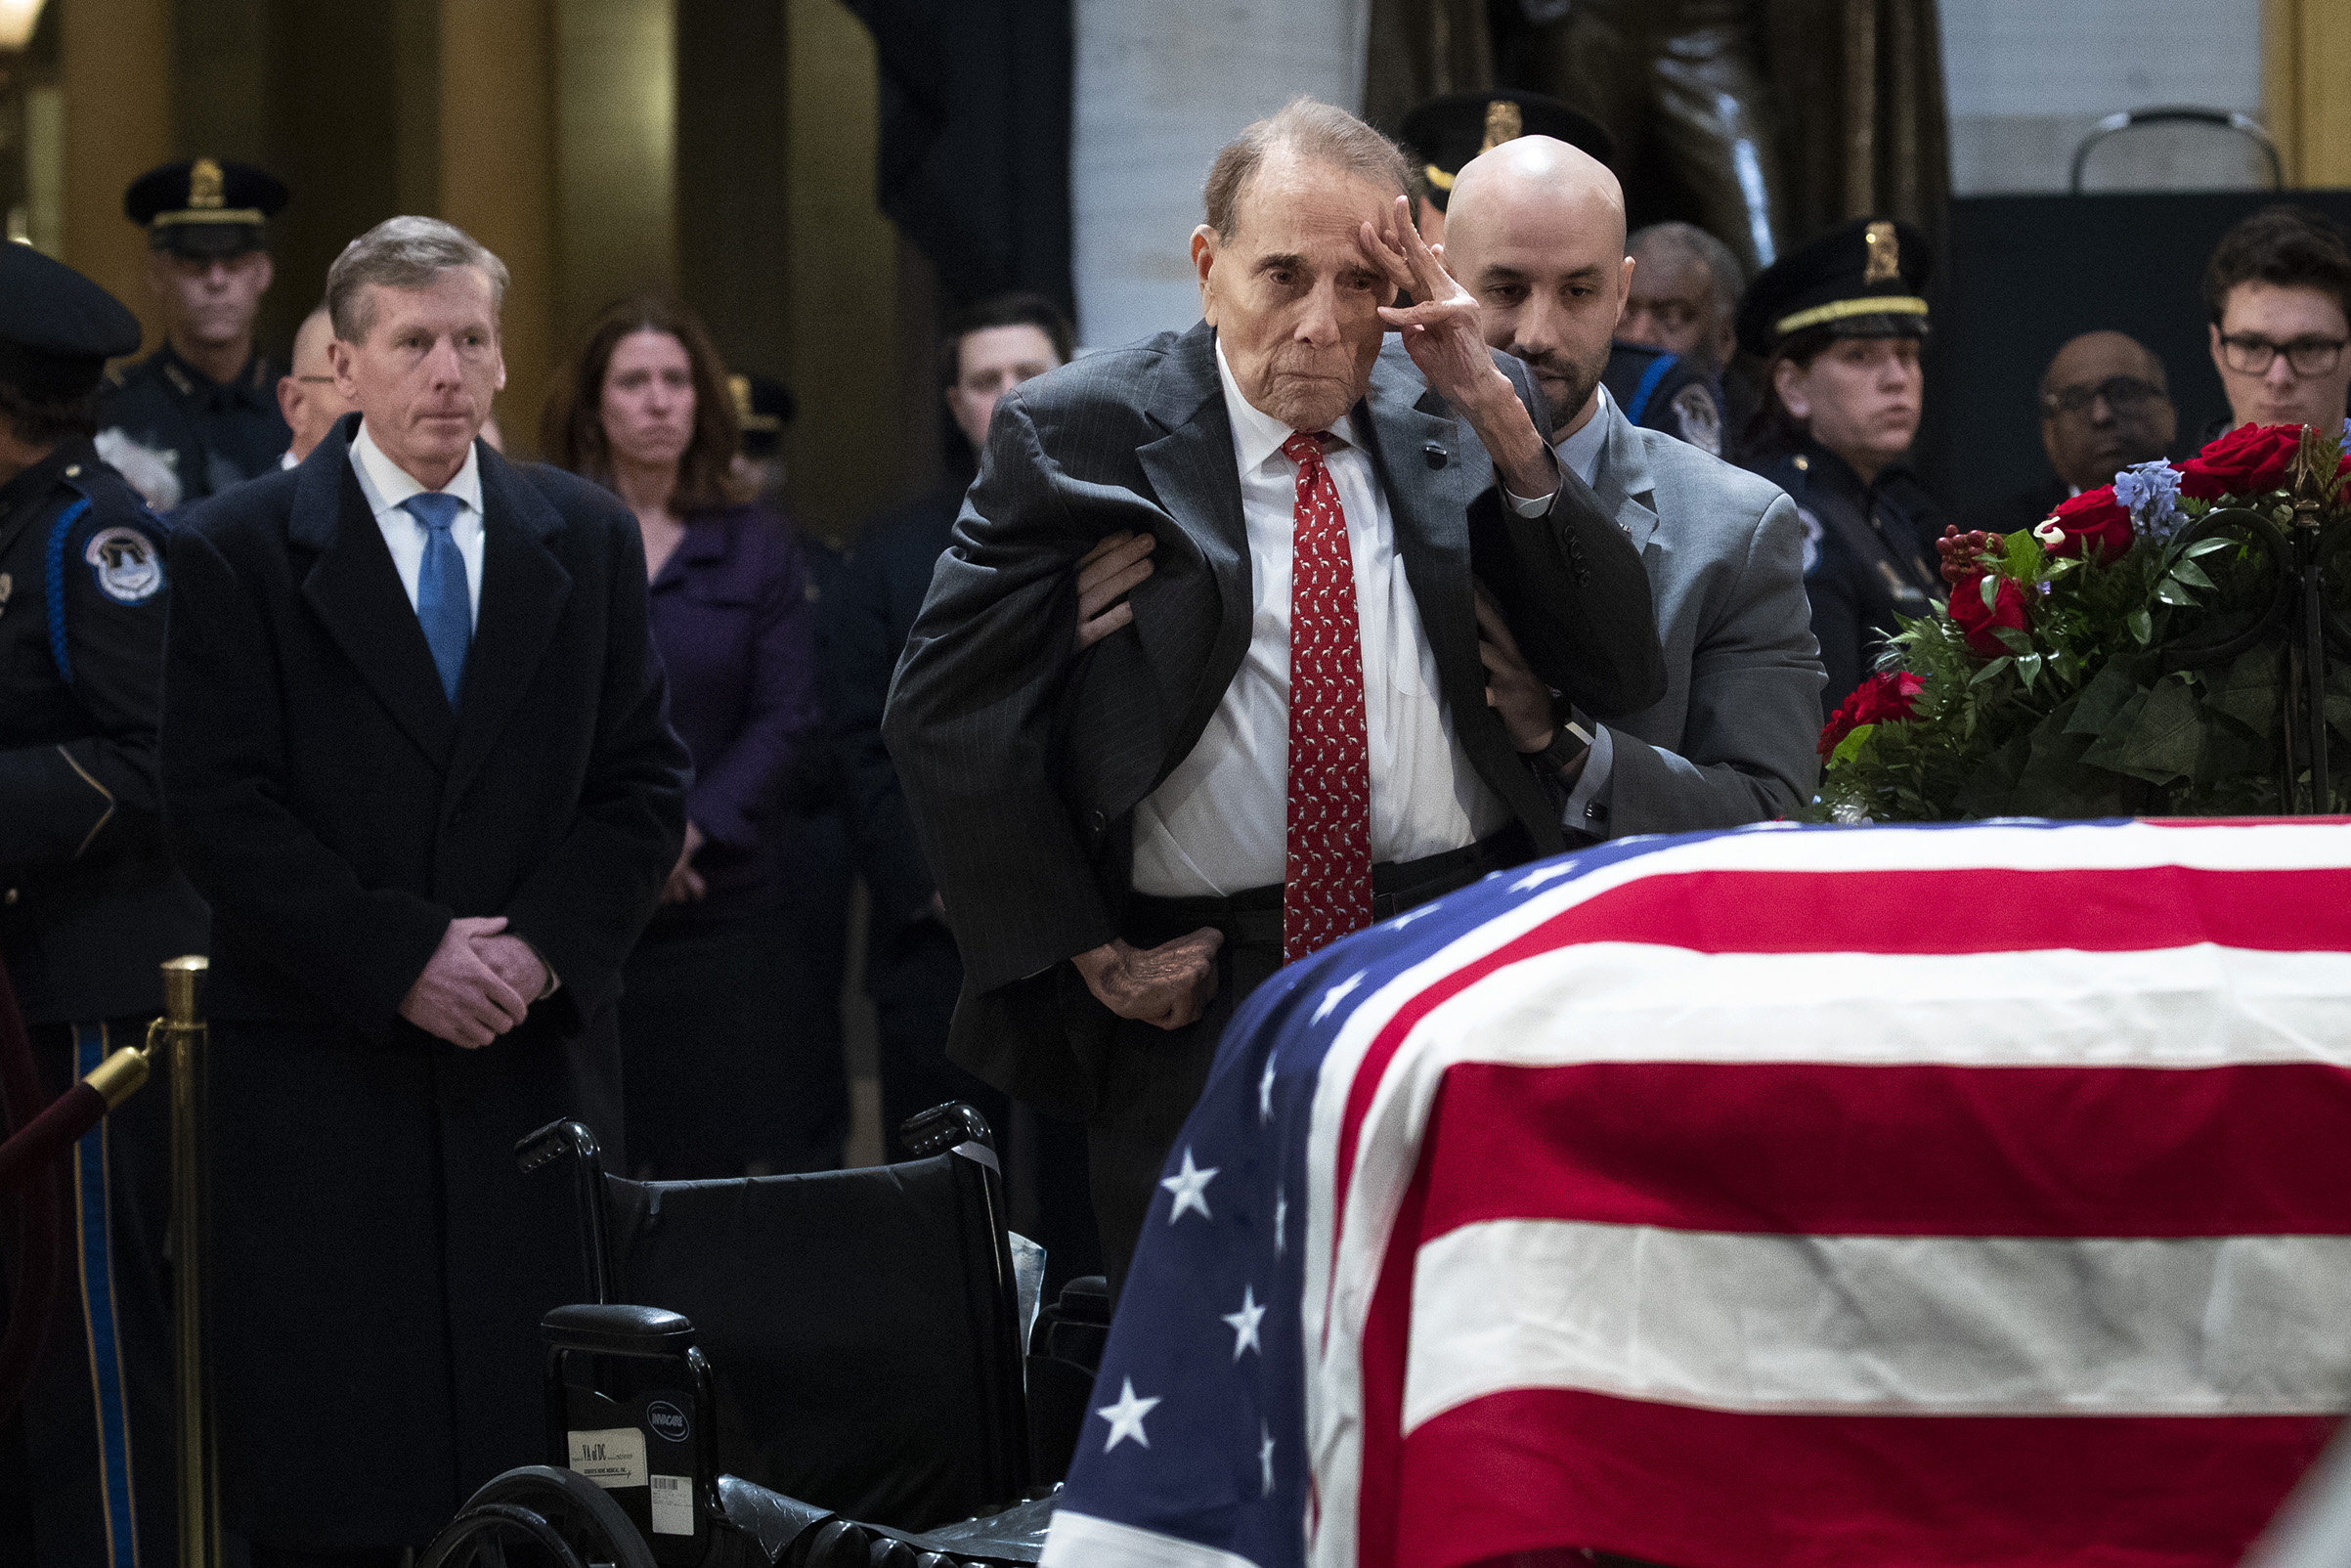 Former Senator Bob Dole stands up and salutes the casket of the late former President George H.W. Bush as he lies in state at the U.S. Capitol, on Dec. 4, 2018. (Drew Angerer—Getty Images)